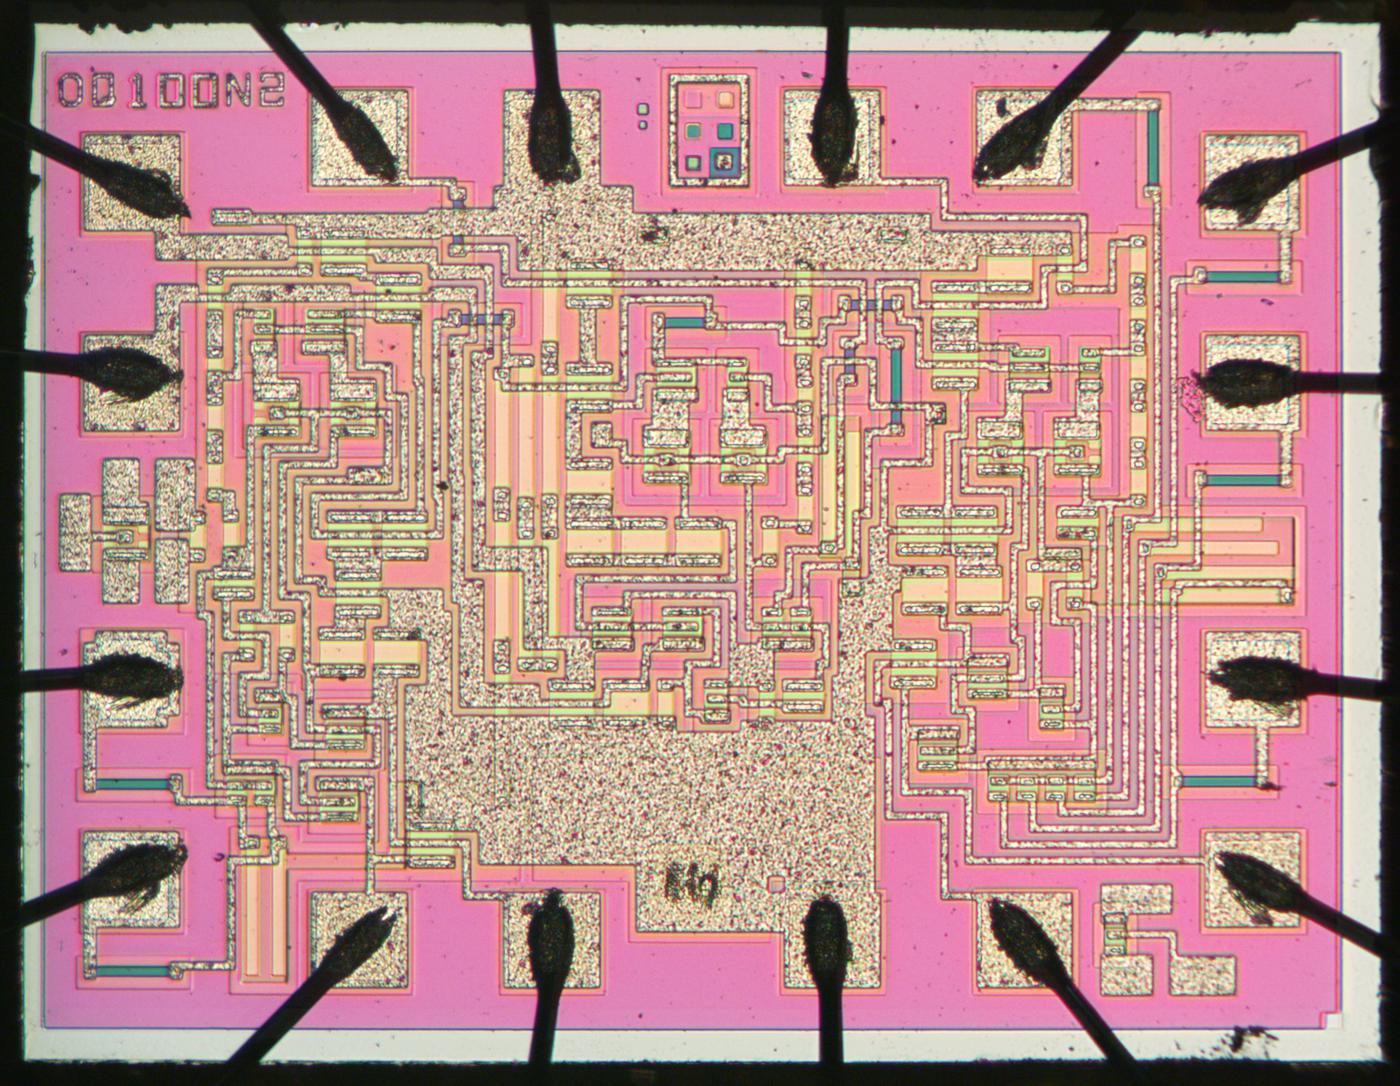 Reverse-engineering a vintage OR/NOR chip